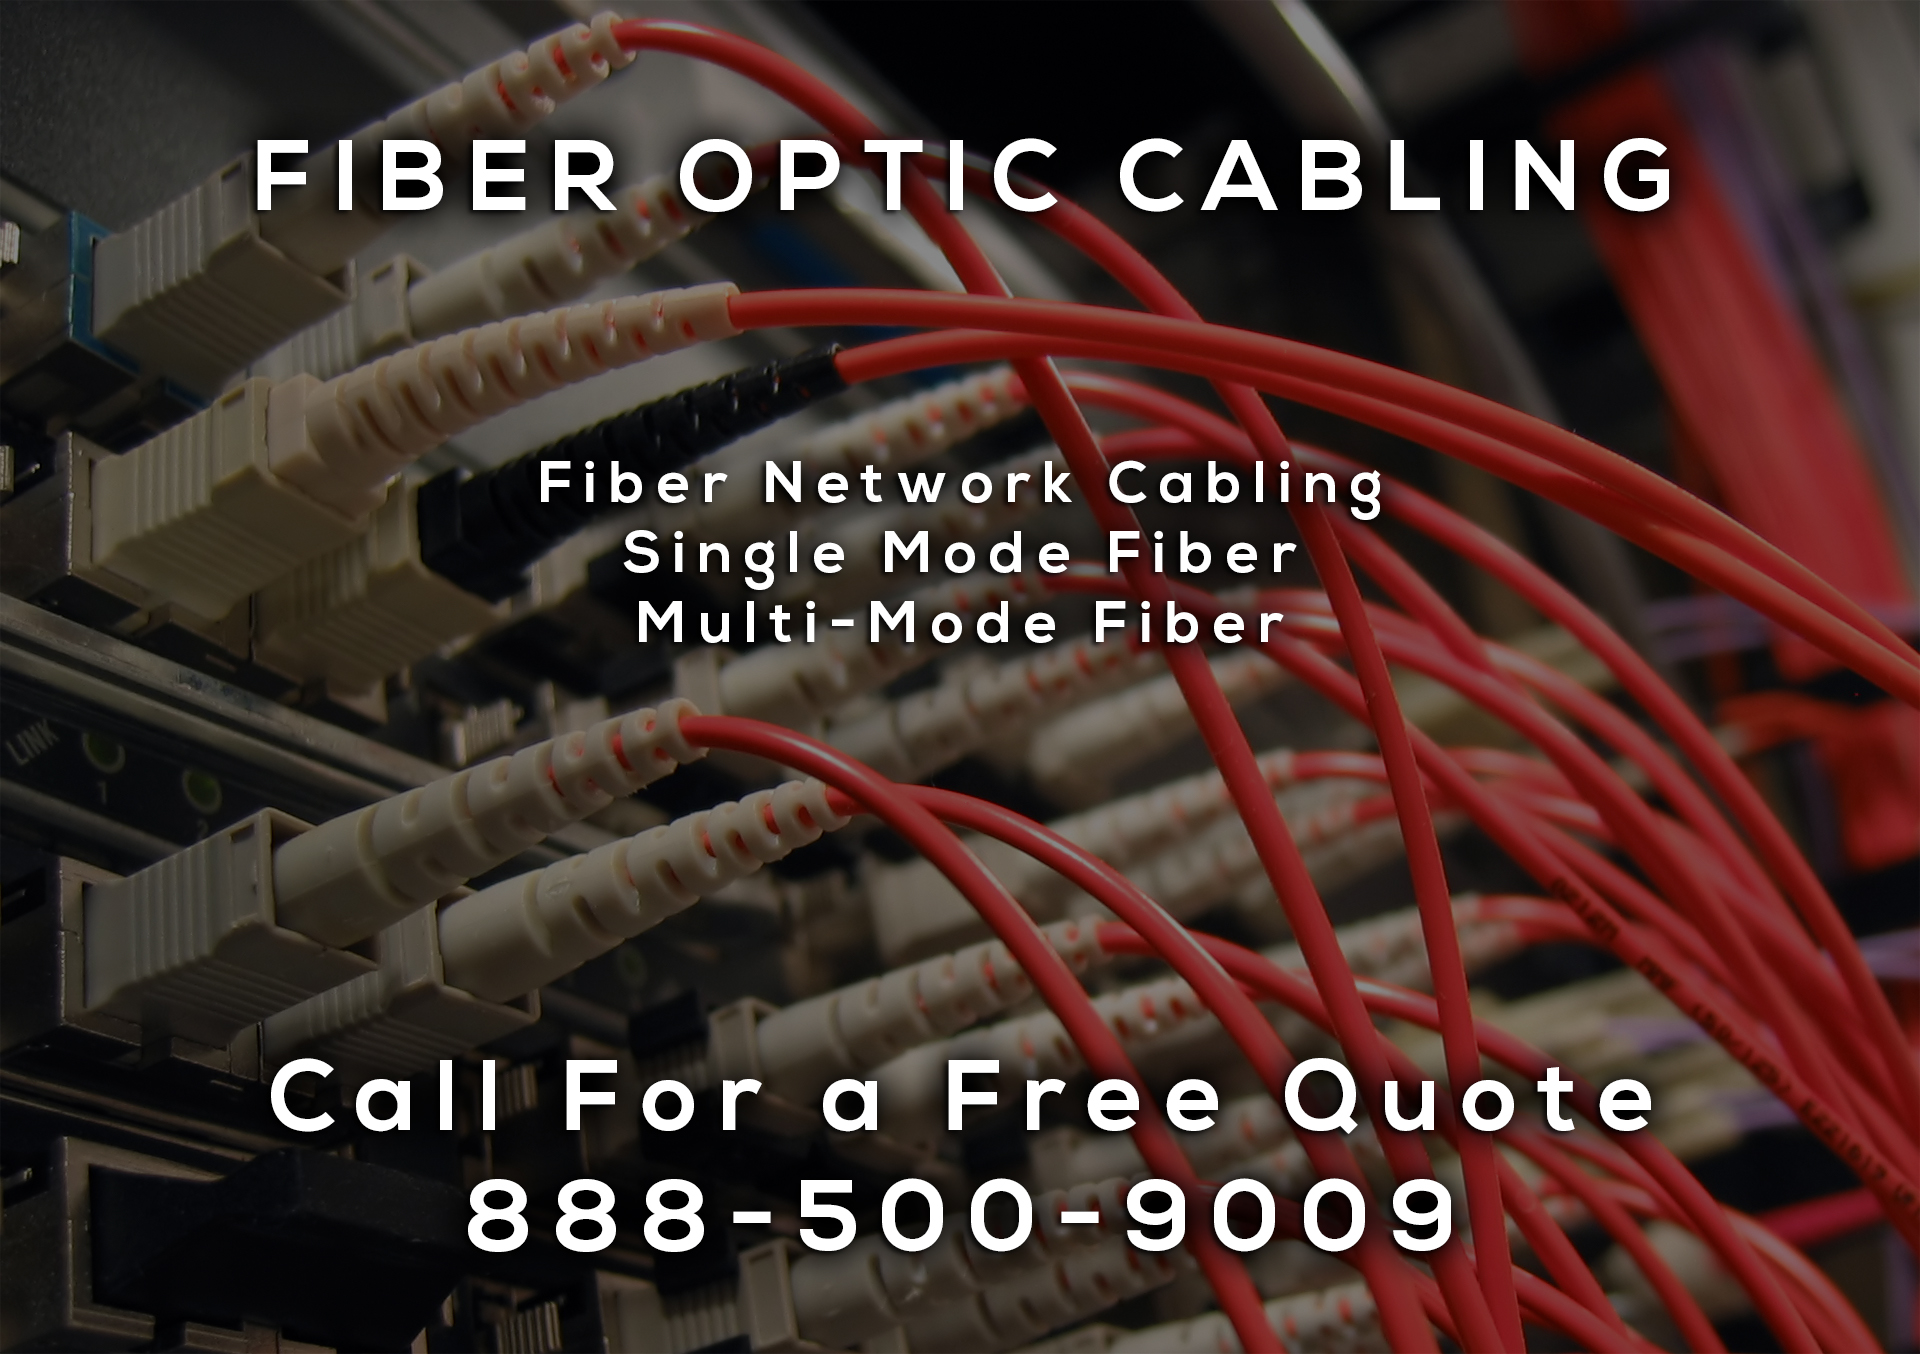 Fiber Optic Cable Installation in Upland CA